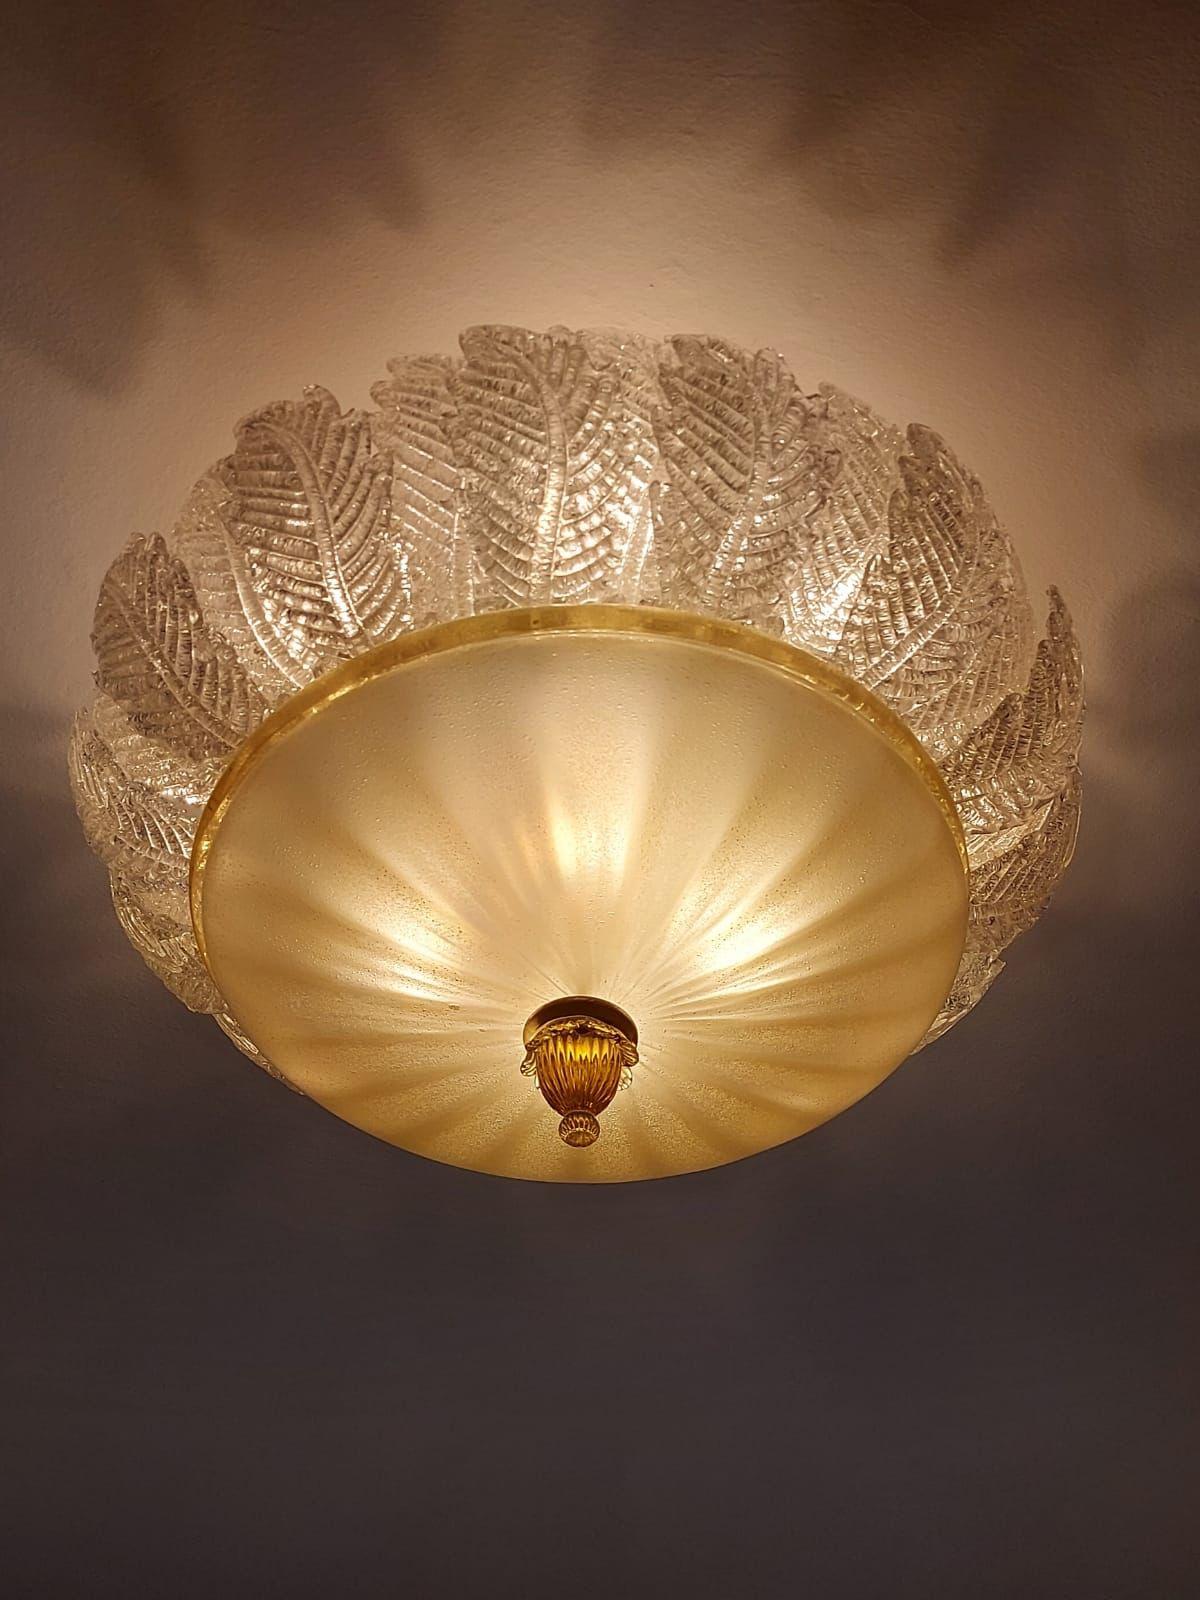 Barovier Ceiling Lamp with Gold Inclusion, Italy 1930s For Sale 1